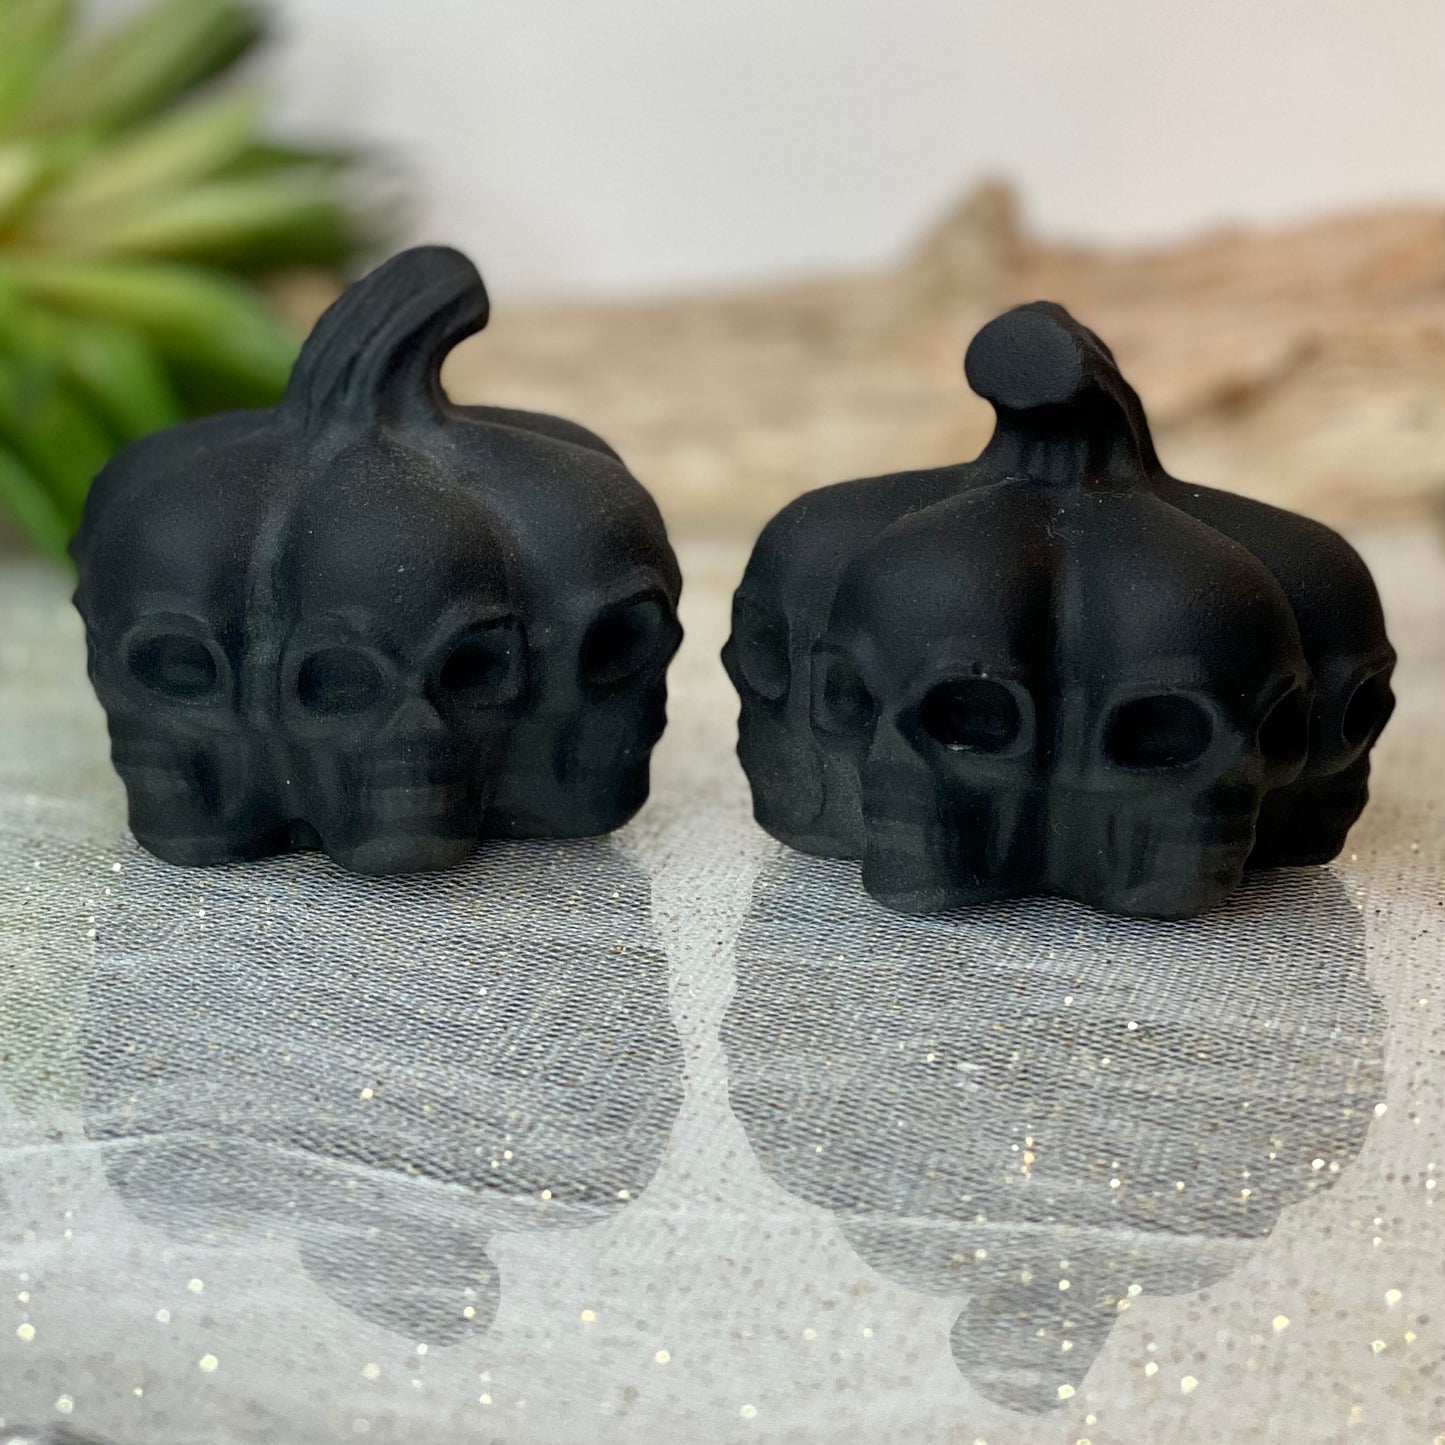 Black Obsidian Carved Skull Pumpkins: Unique Halloween Decor with Protective Energies